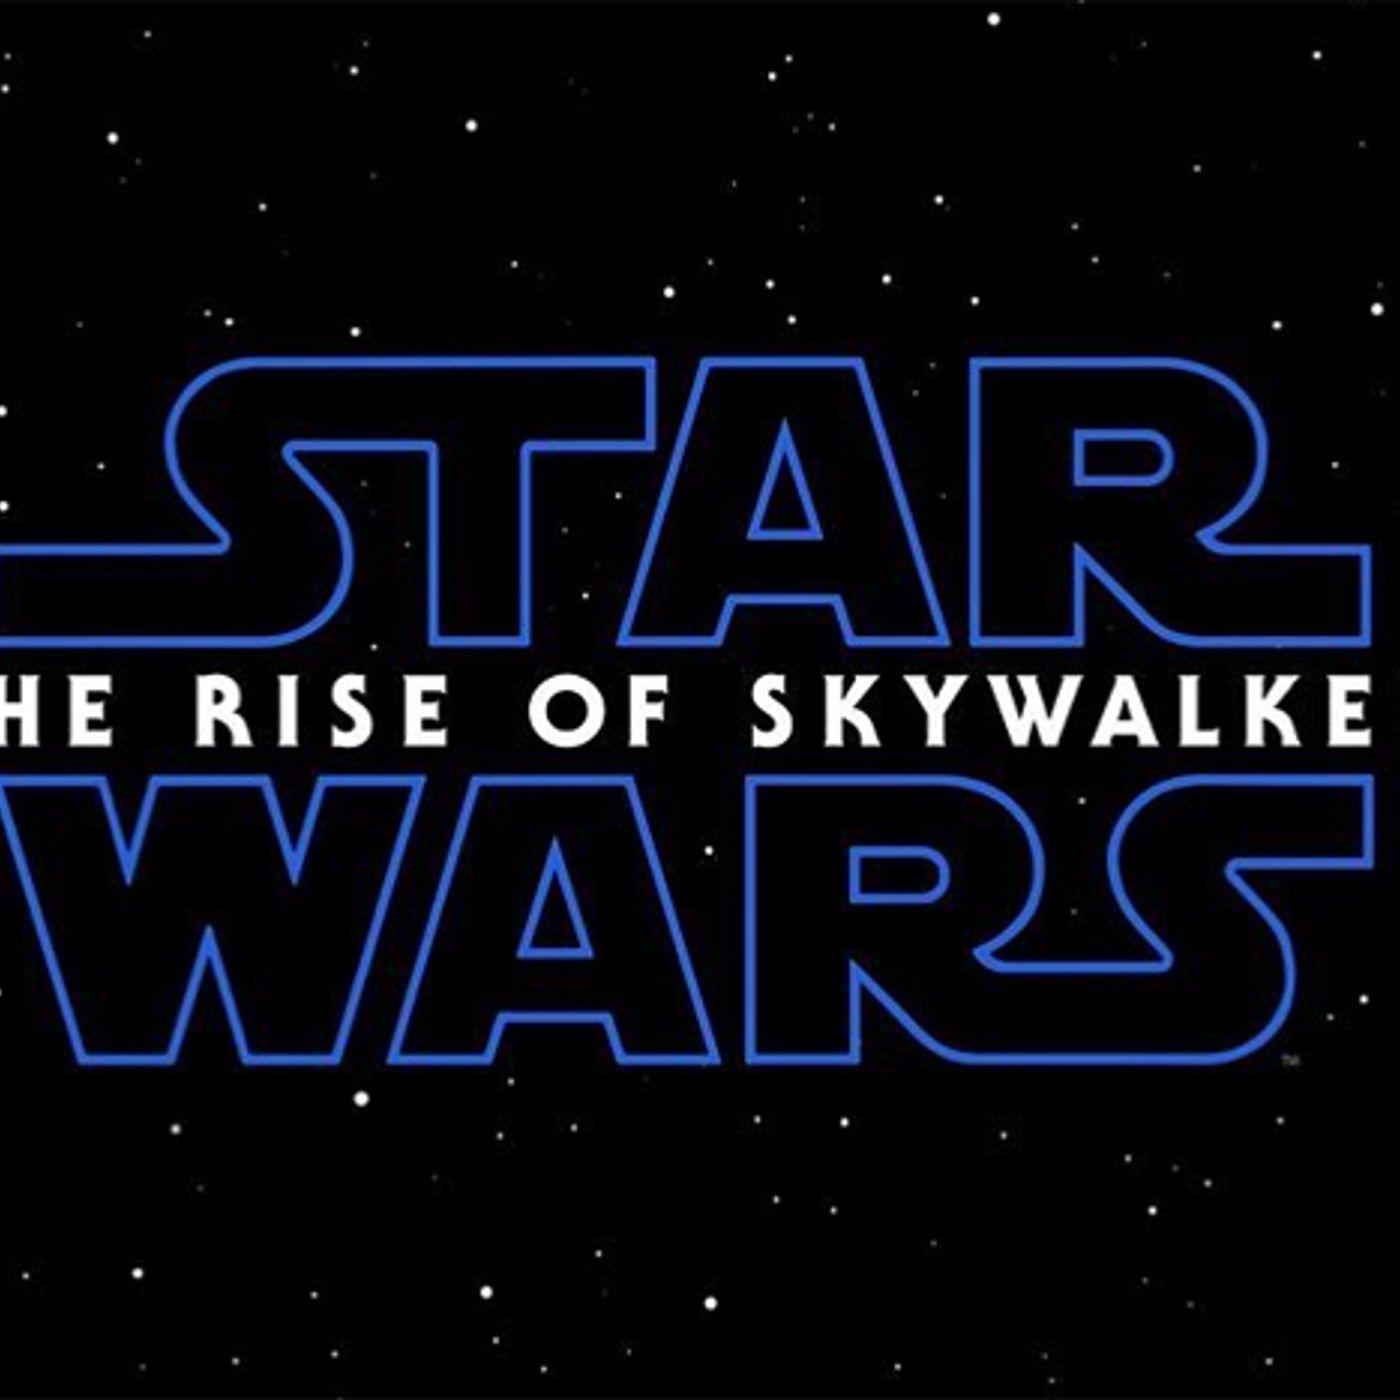 A Star Wars Podcast: Game of Wars, Benioff and Weiss get first new movie!